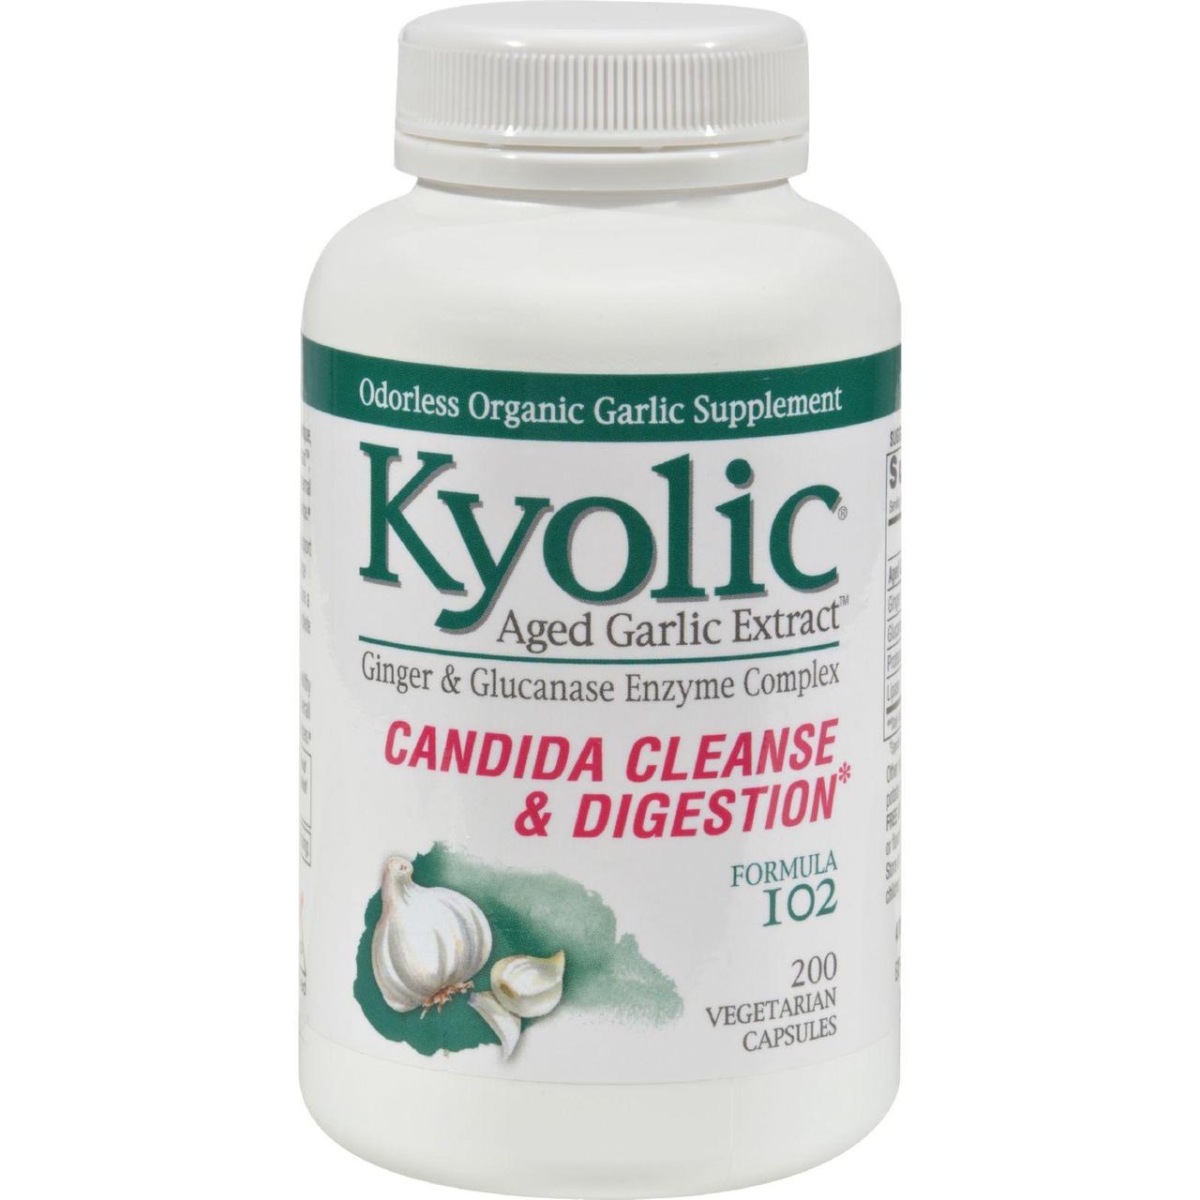 Hg0184929 Aged Garlic Extract Candida Cleanse & Digestion Formula102, 200 Vegetarian Capsules